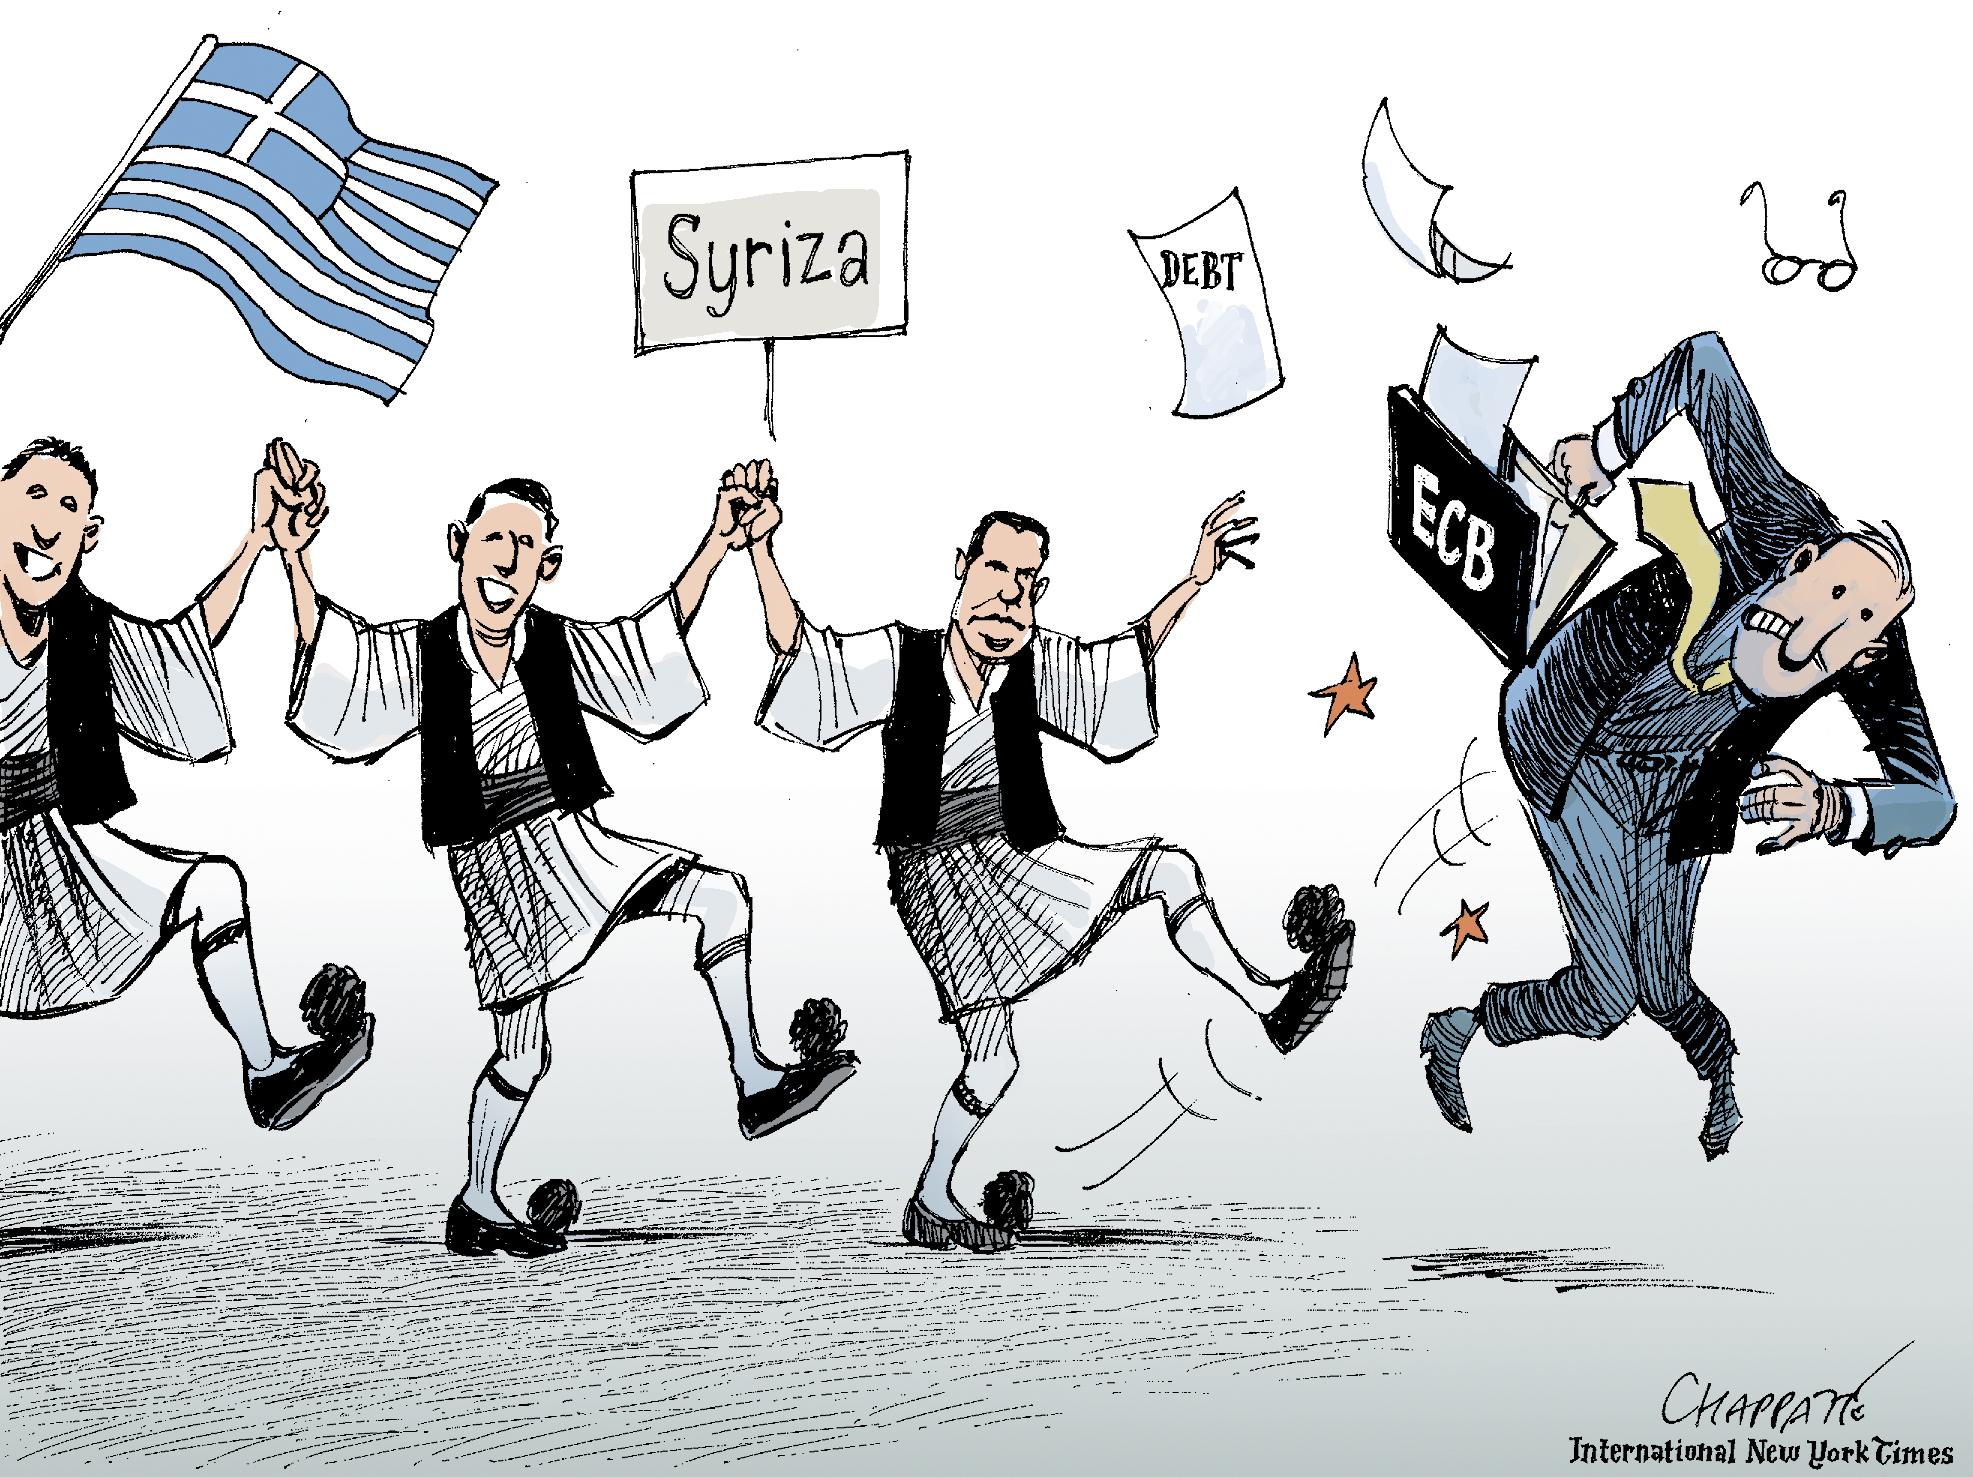 Greeks say no to austerity